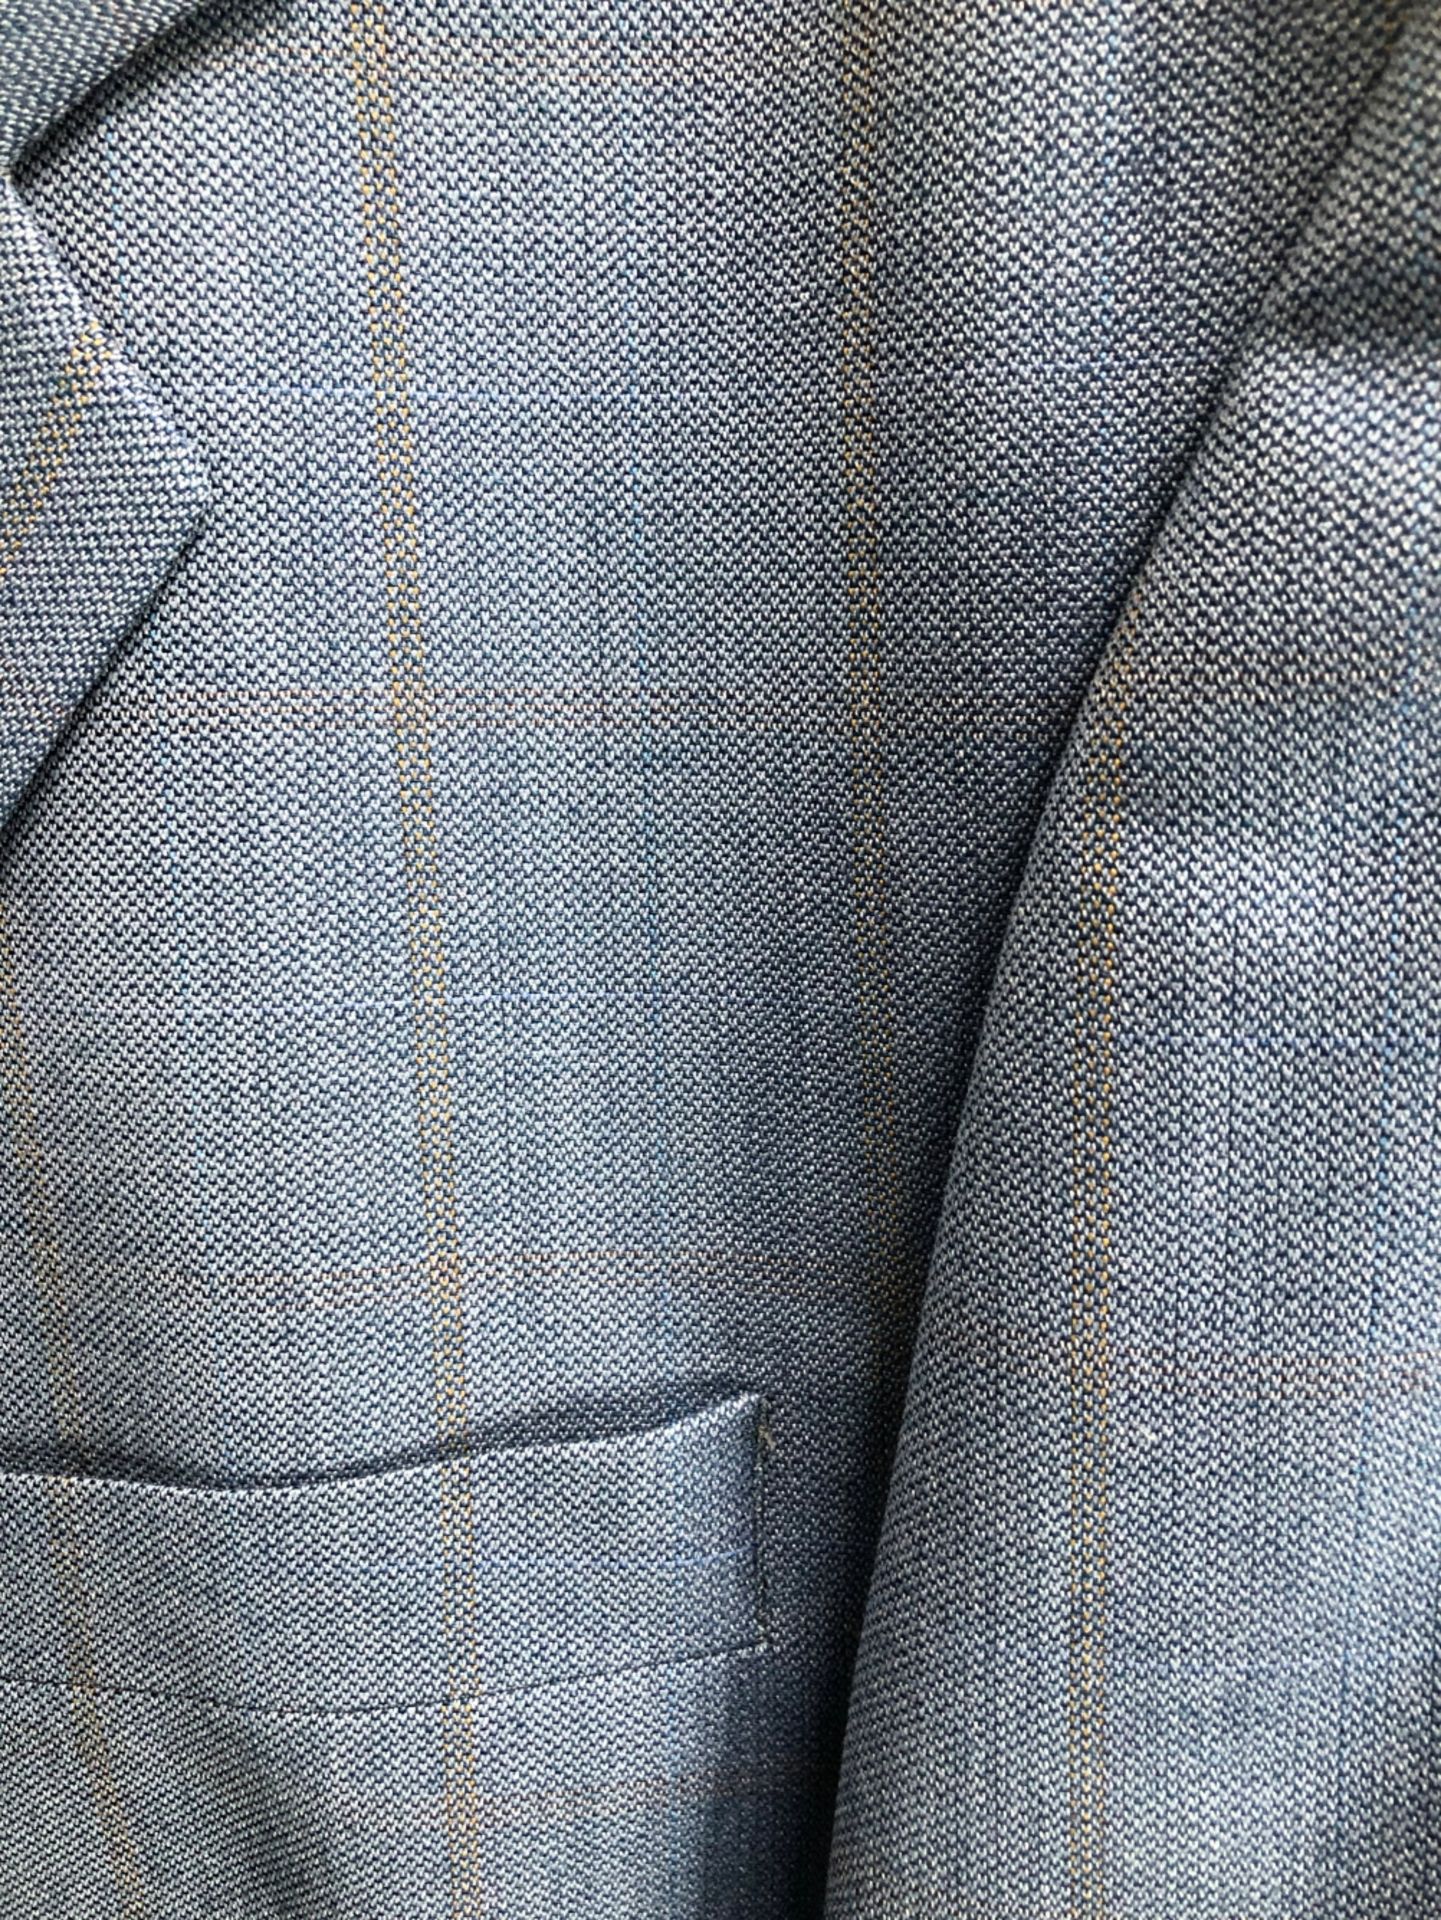 GENTS JACKETS: DEBENHAMS, BROWN WOOL, CHEST 42", A DIGEL, PALE BLUE WOOL WITH SUBTLE BROWN CHECK, - Image 9 of 9